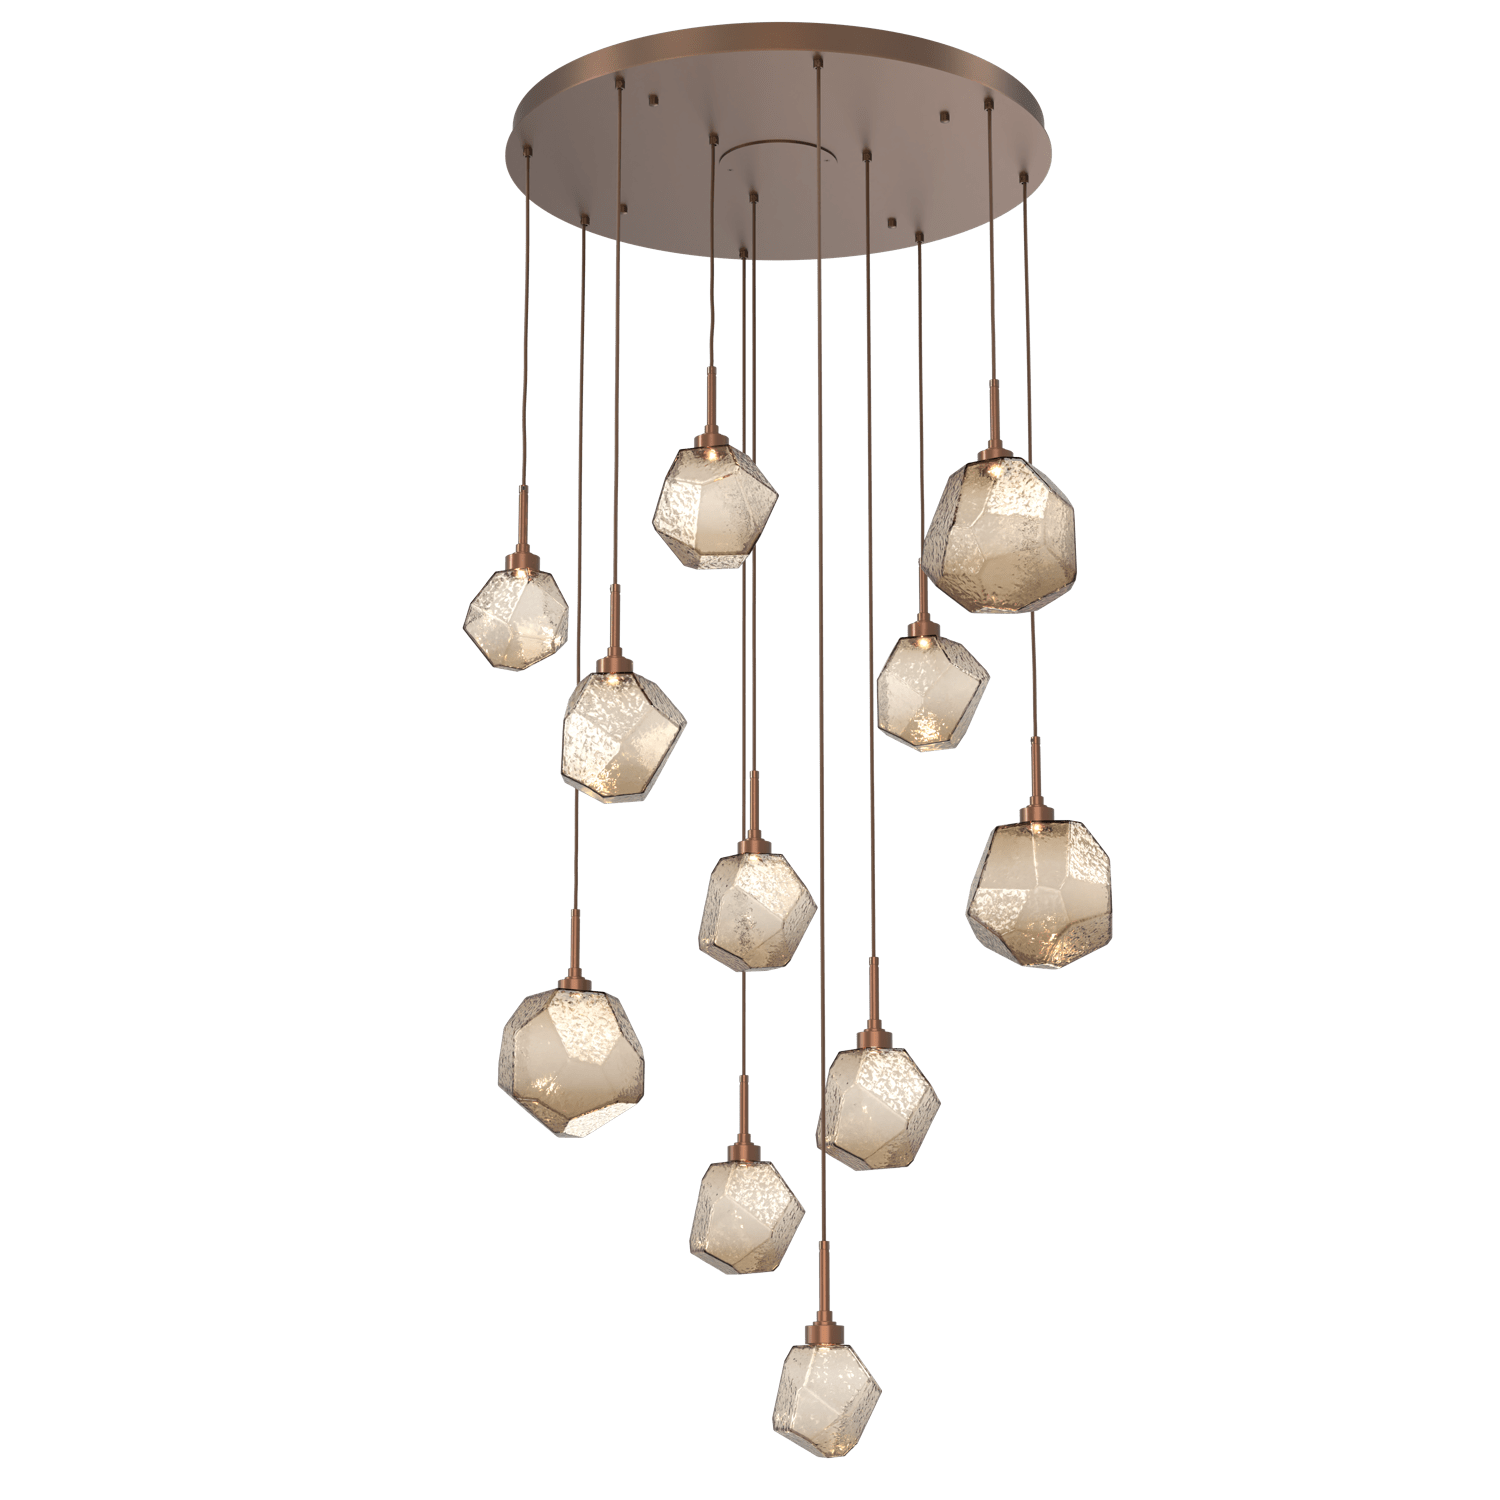 CHB0039-11-BB-B-Hammerton-Studio-Gem-11-light-round-pendant-chandelier-with-burnished-bronze-finish-and-bronze-blown-glass-shades-and-LED-lamping